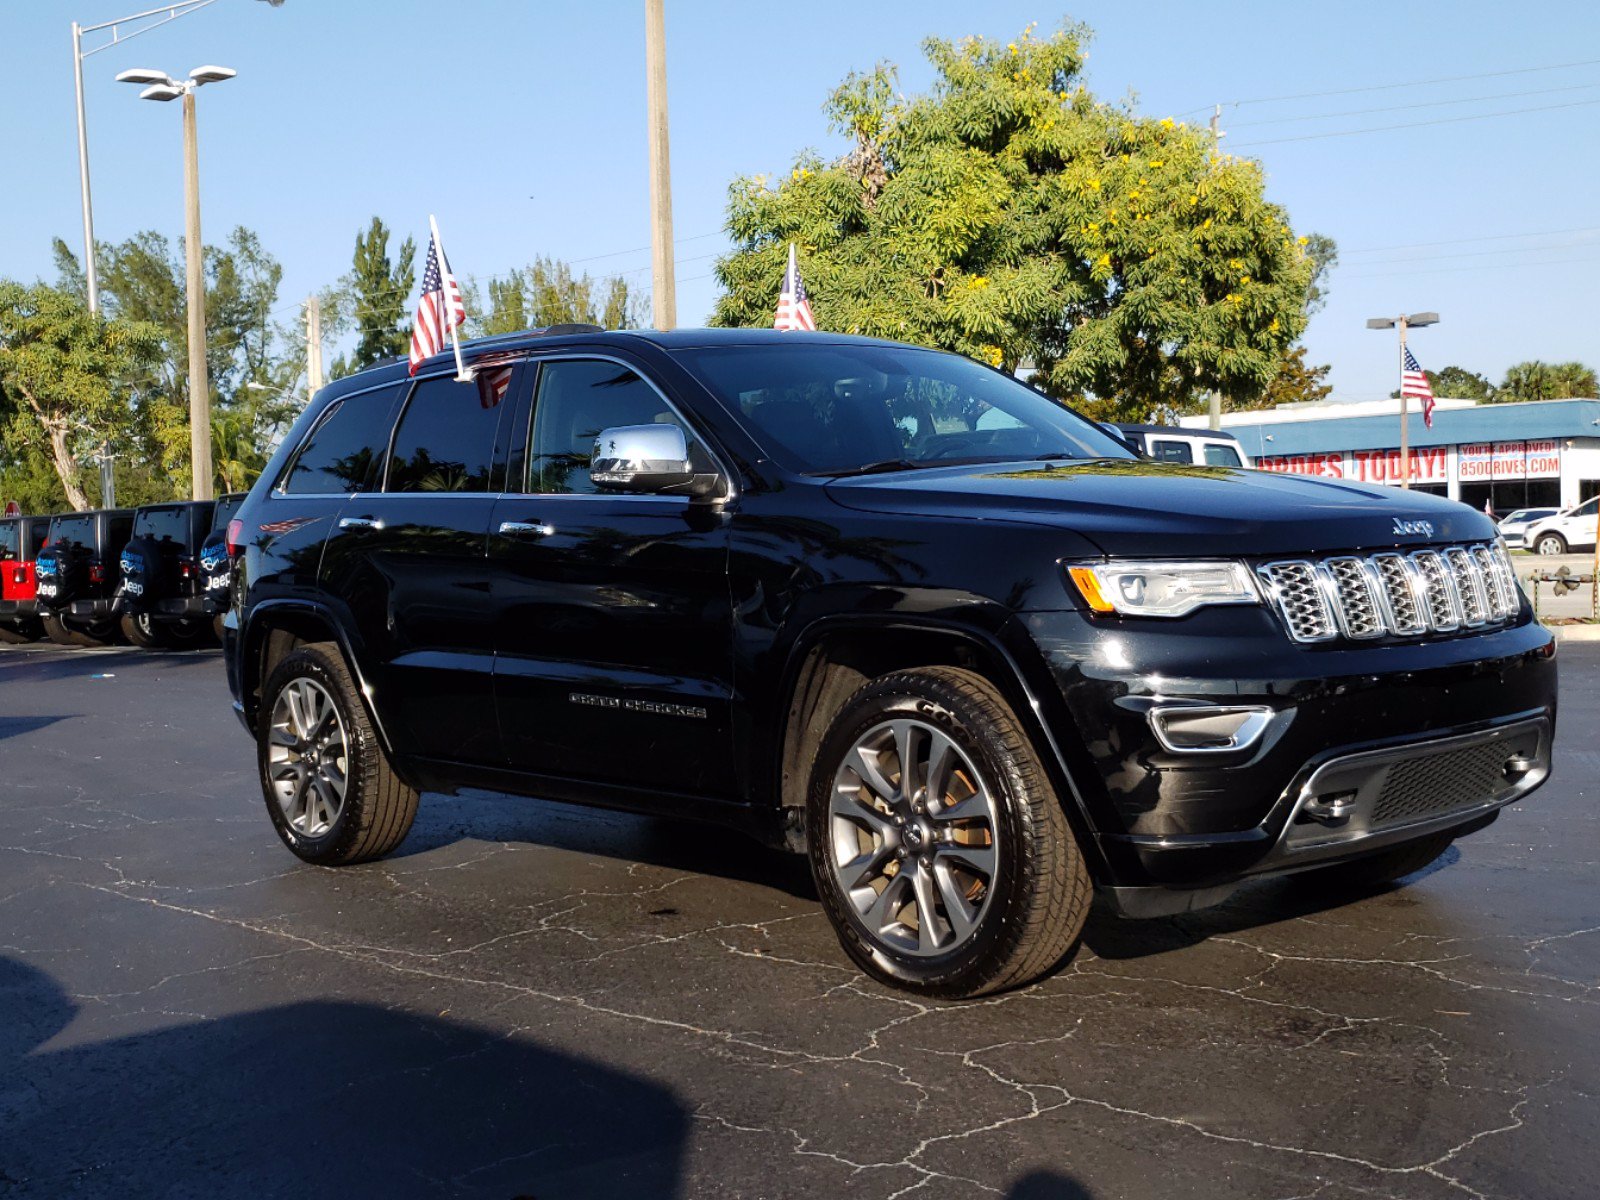 Pre Owned 2017 Jeep Grand Cherokee Overland Sport Utility In Plantation